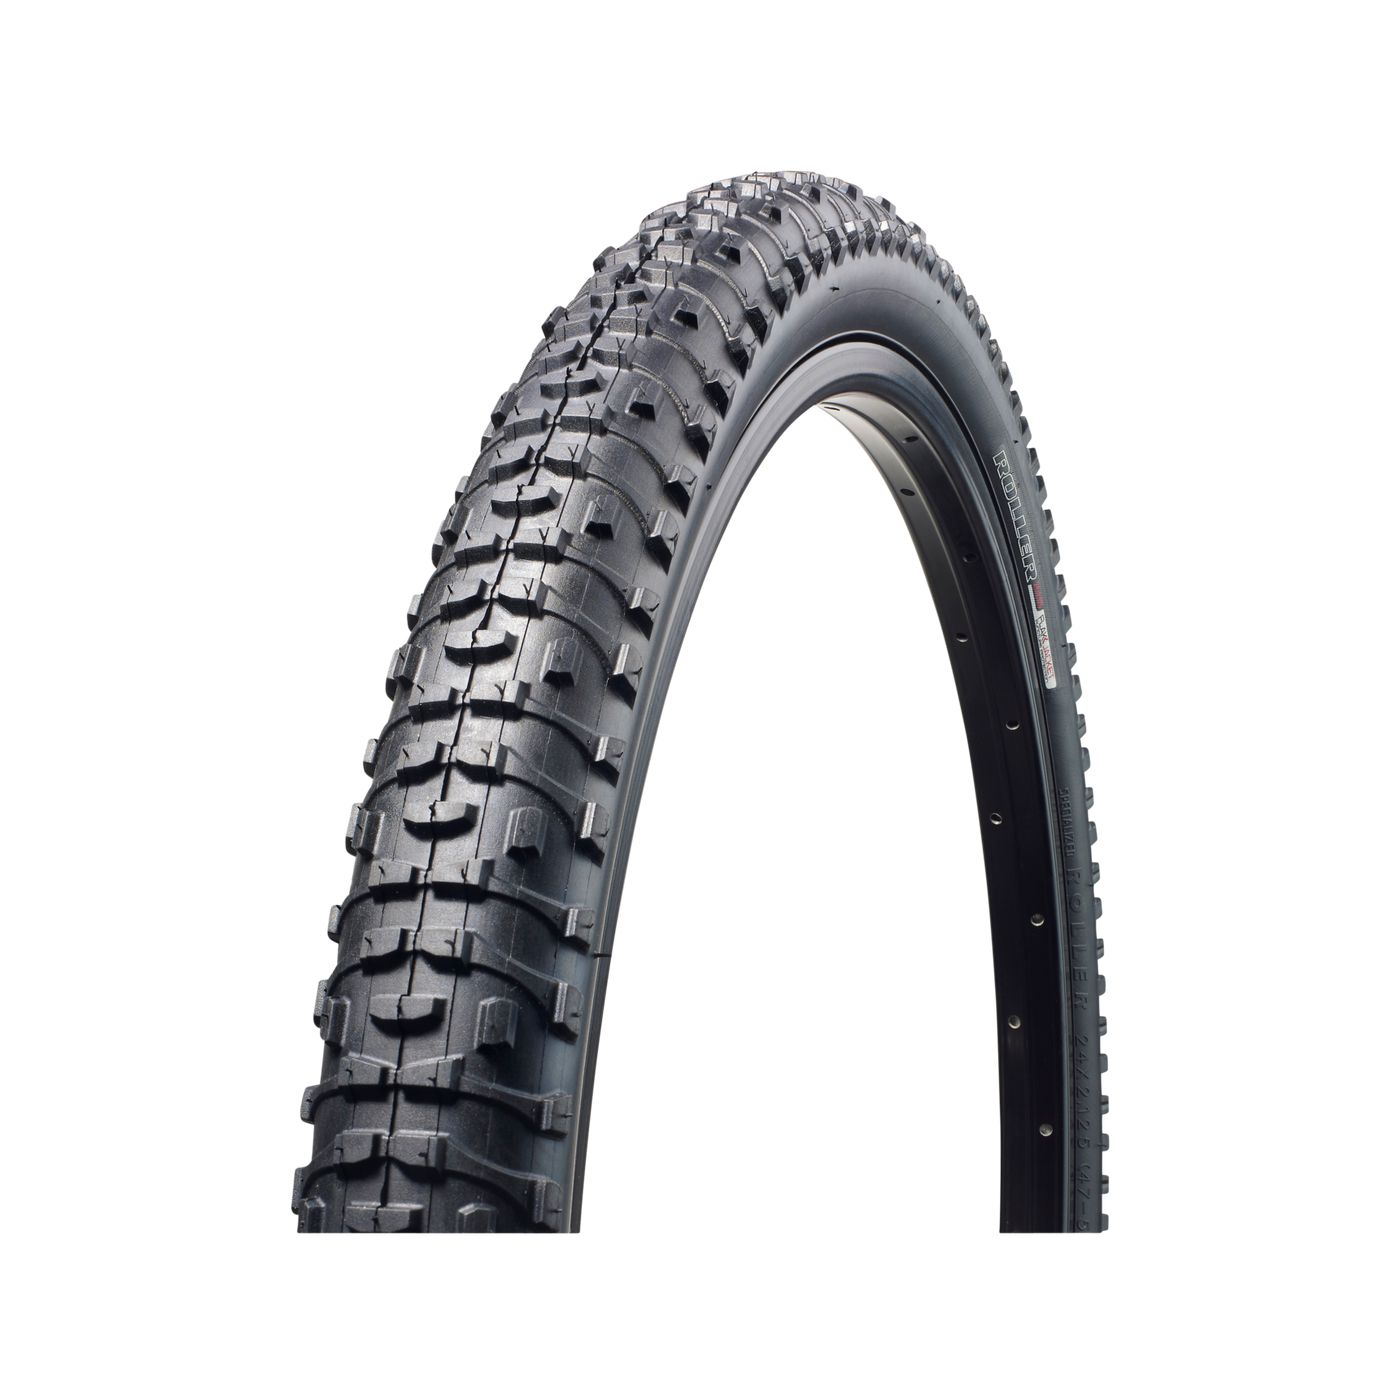 Specialized Roller 16" Bike Tire - Tires - Bicycle Warehouse